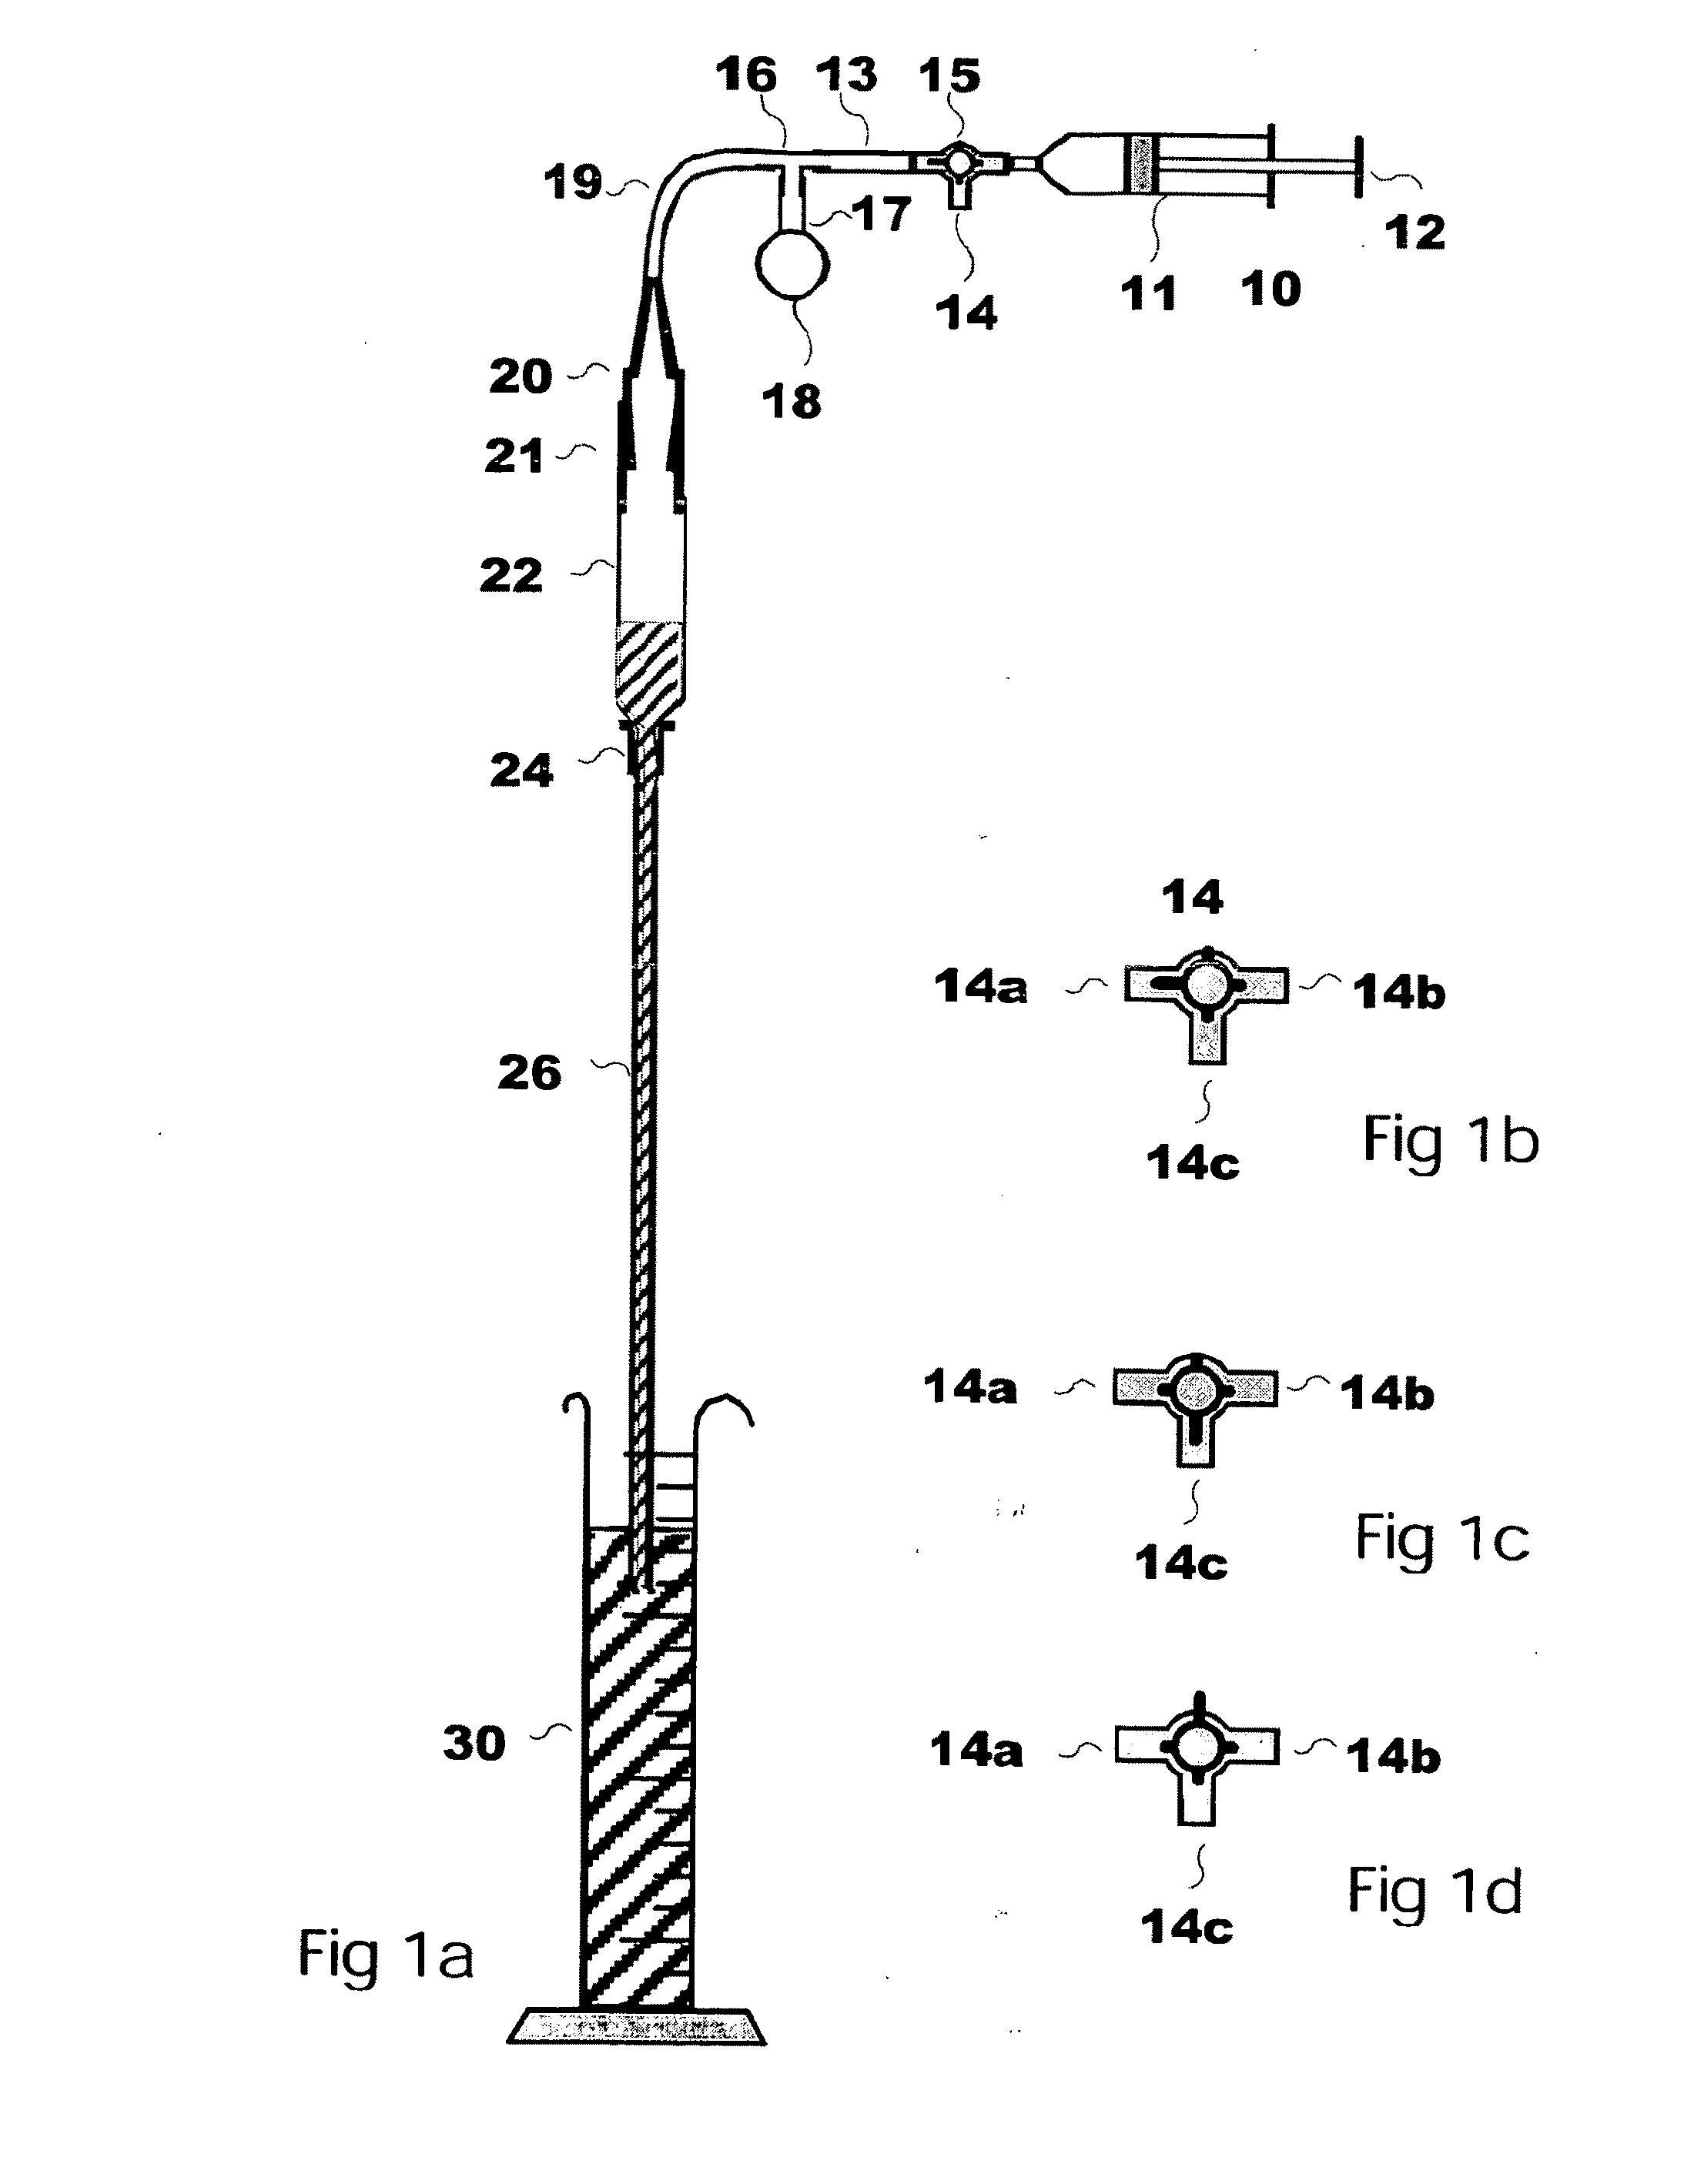 Prevention of indwelling device related infection: compositions and methods